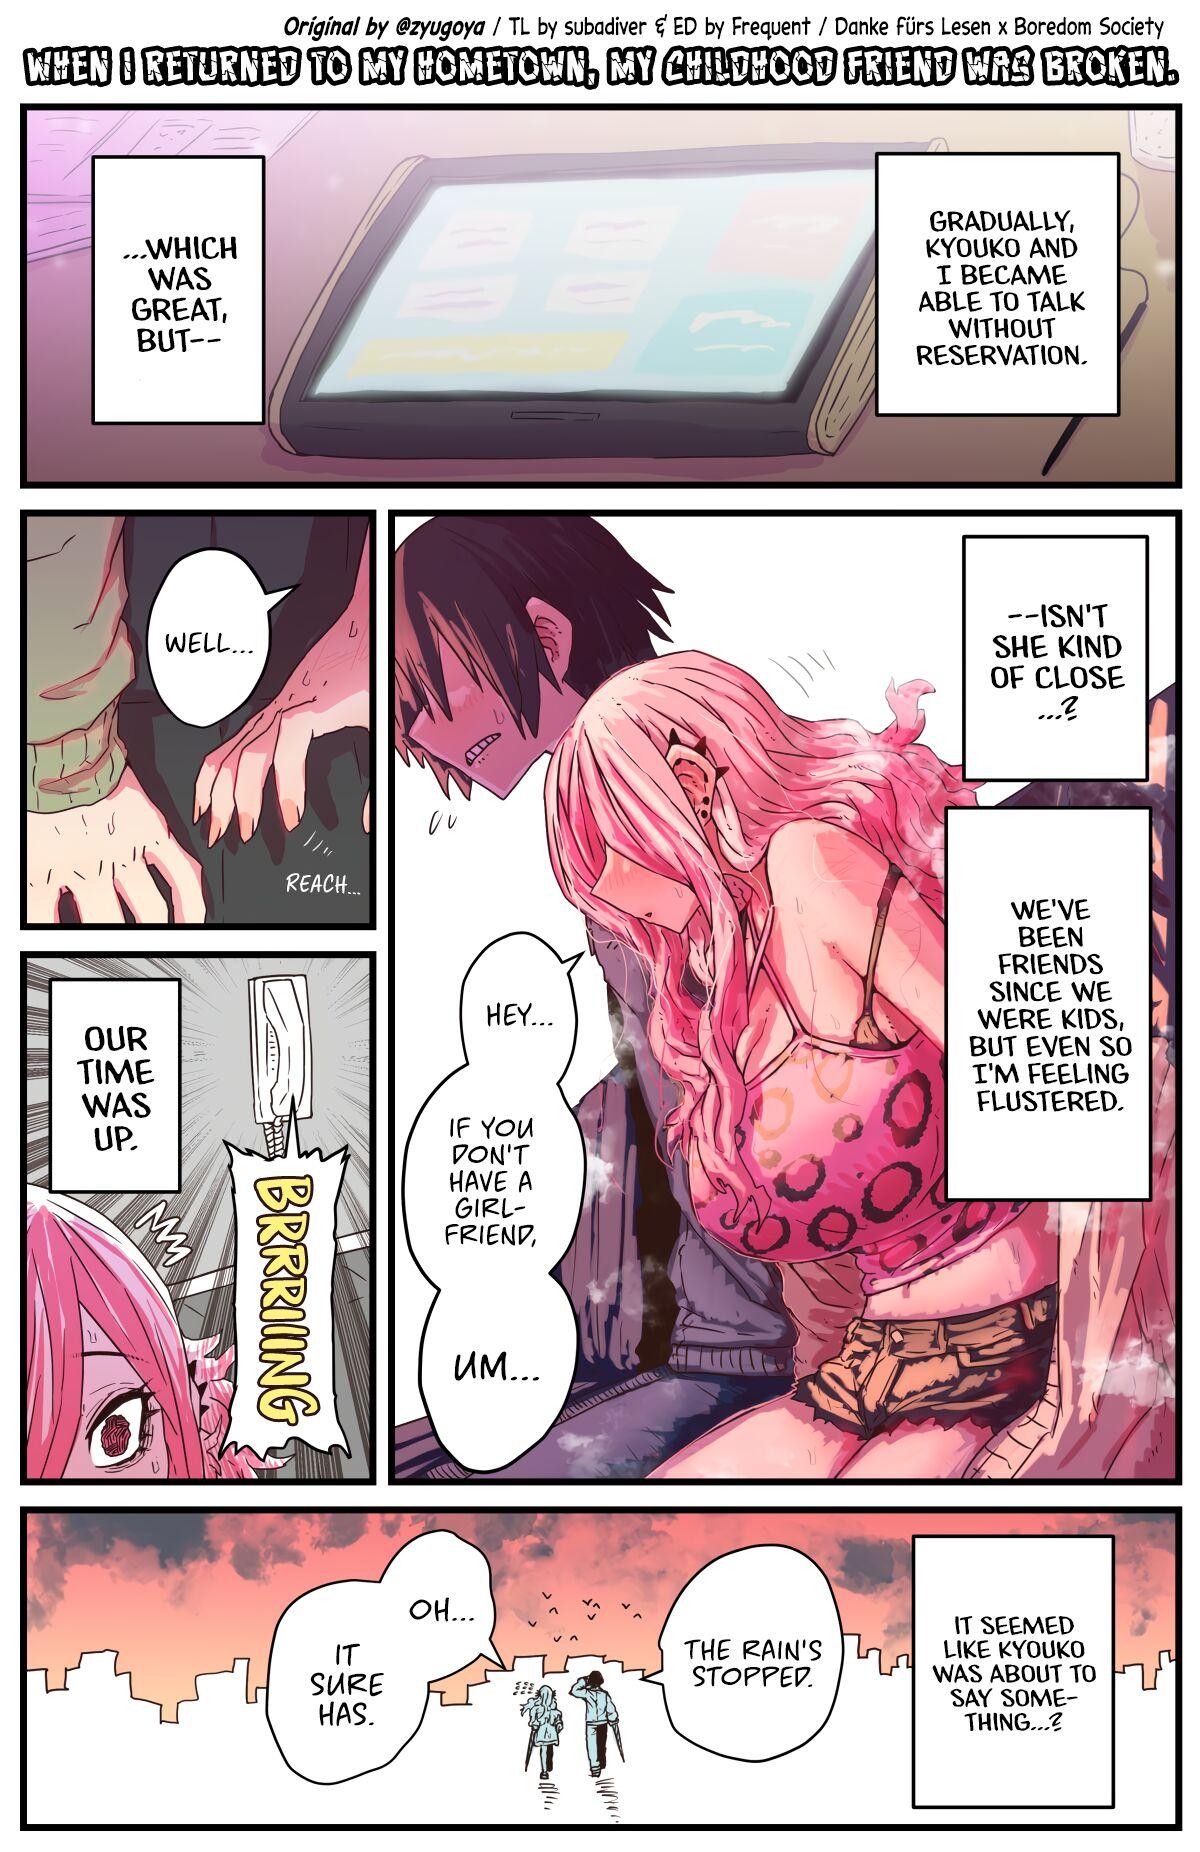 Taboo When I Returned to My Hometown, My Childhood Friend was Broken - Original Tites - Page 8